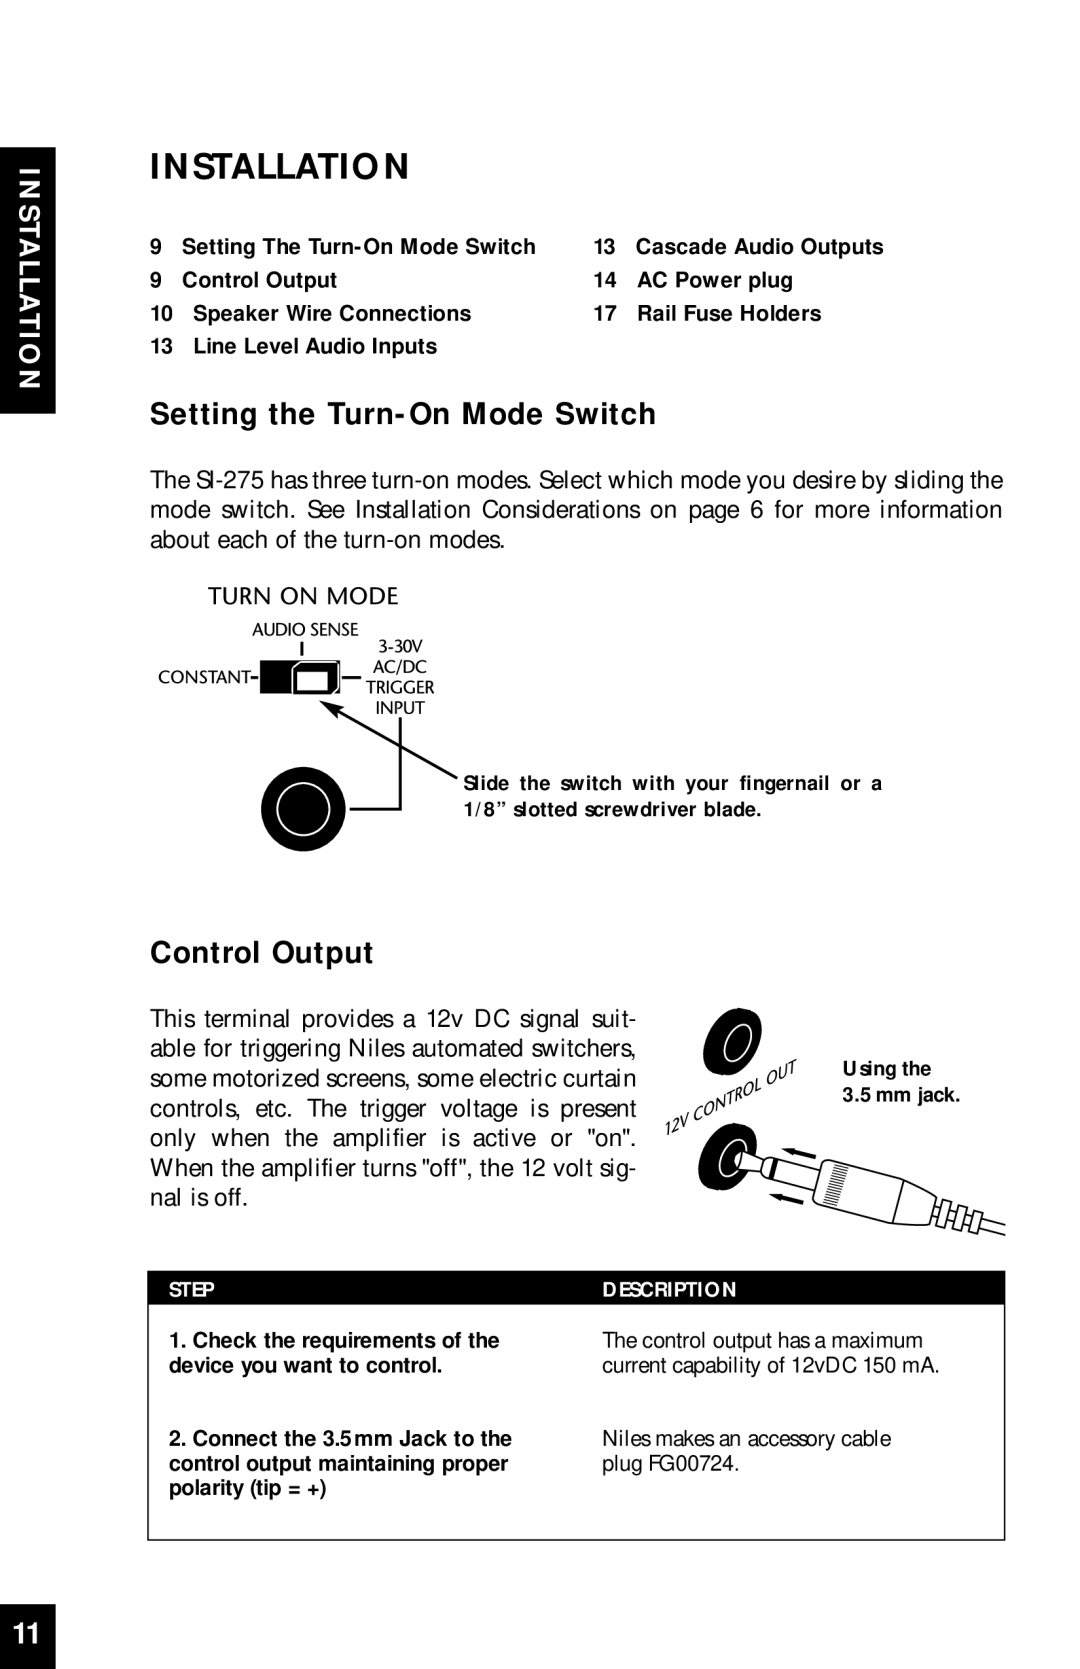 Niles Audio SI-275 manual Installation, Setting the Turn-OnMode Switch, Control Output 